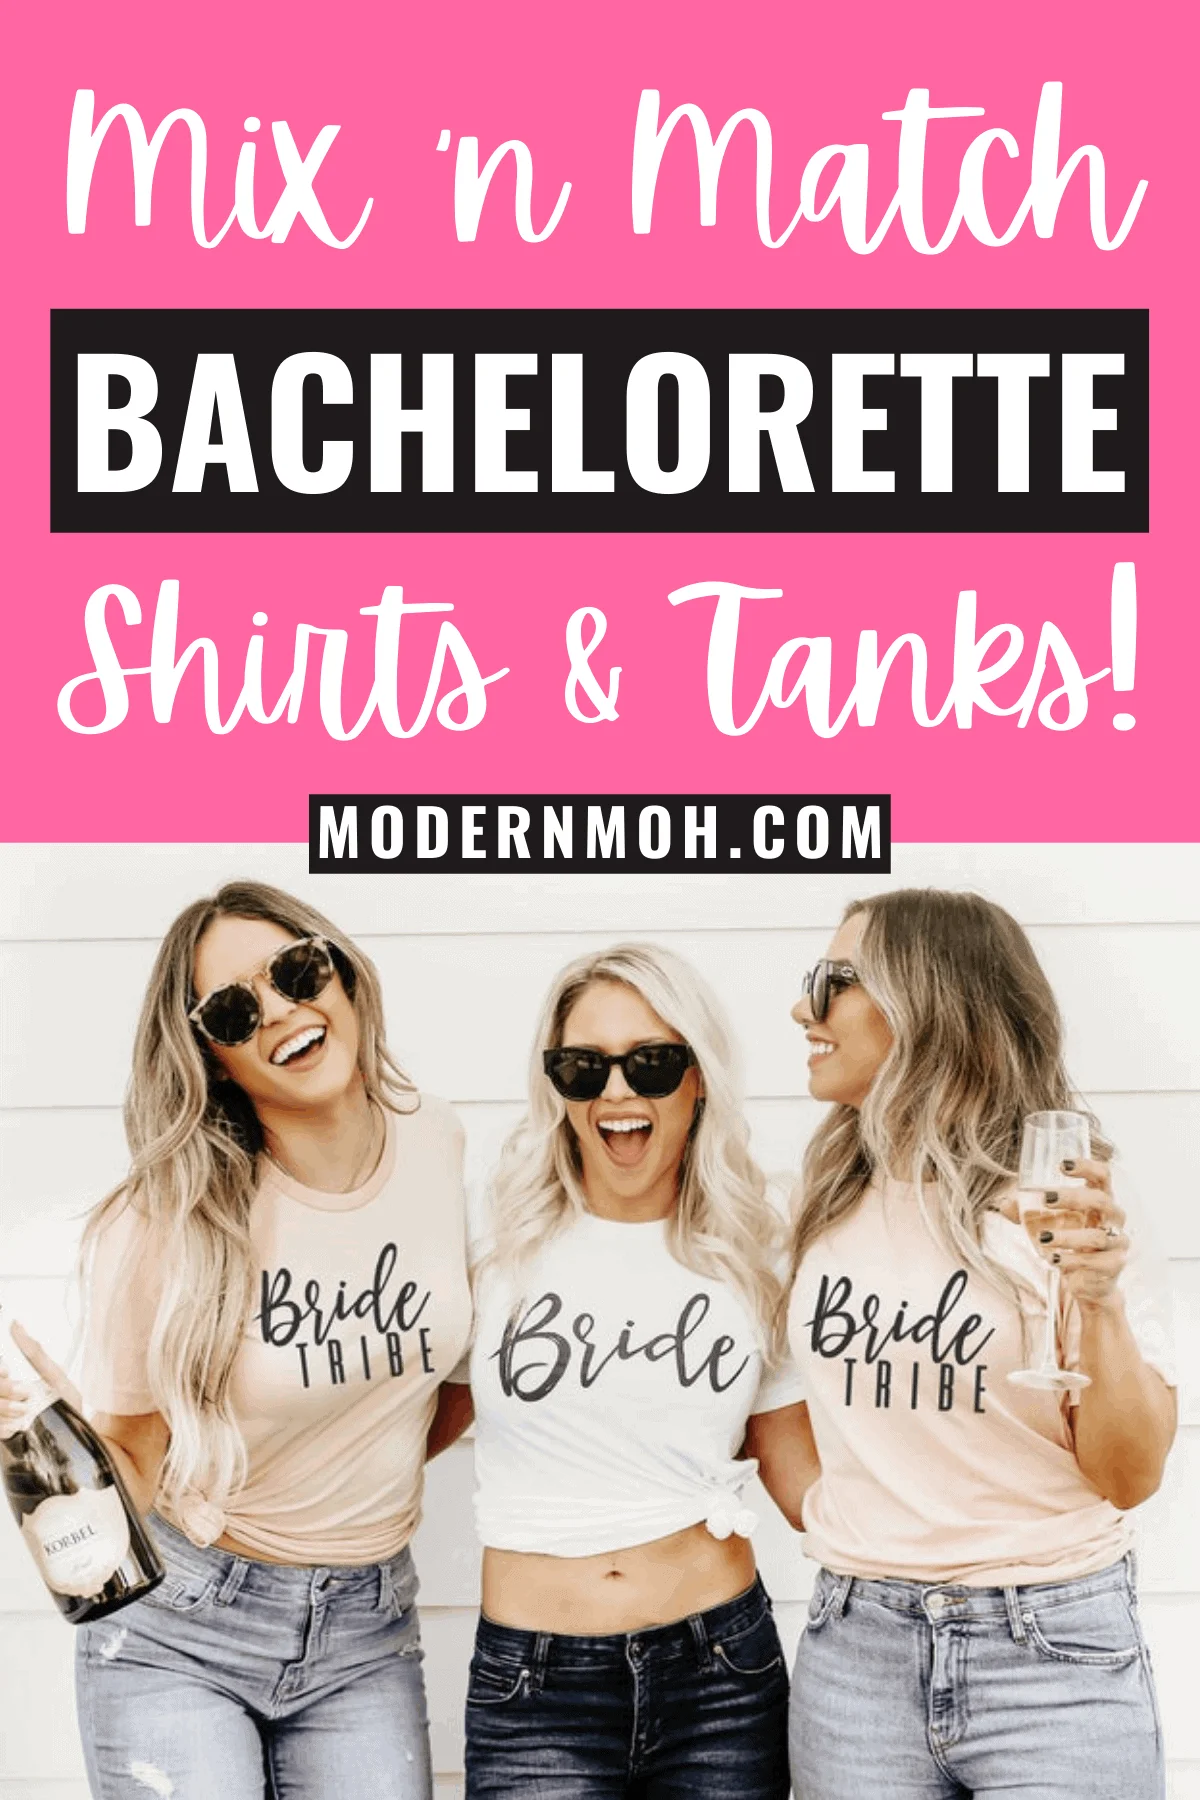 50 Bachelorette Party Shirts and Tanks for Every Squad